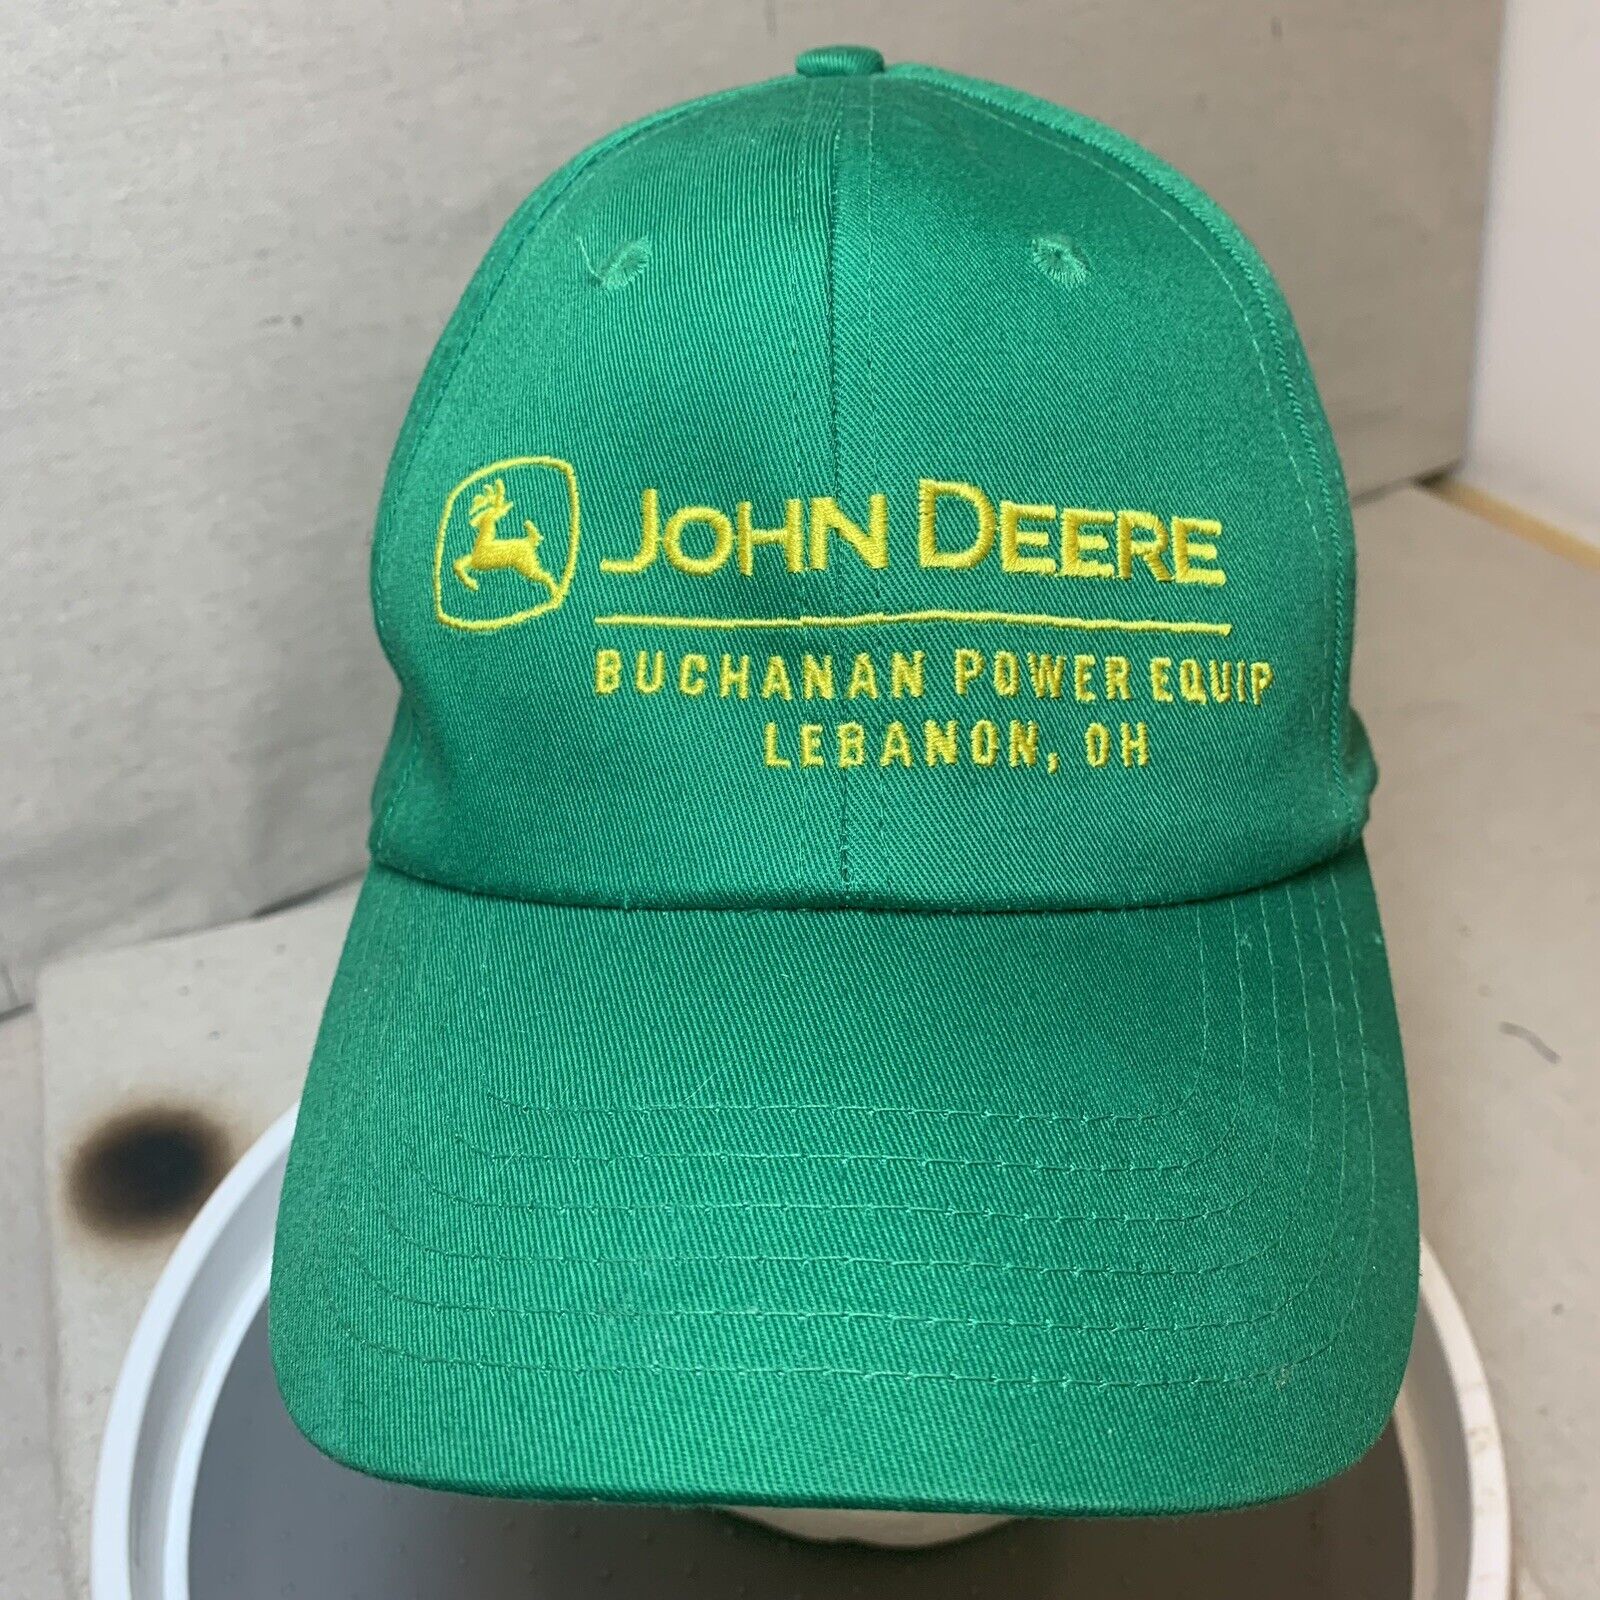 John Deere Lebanon Ohio K Products Hat Ball Cap Adjustable Embroidered Excellent